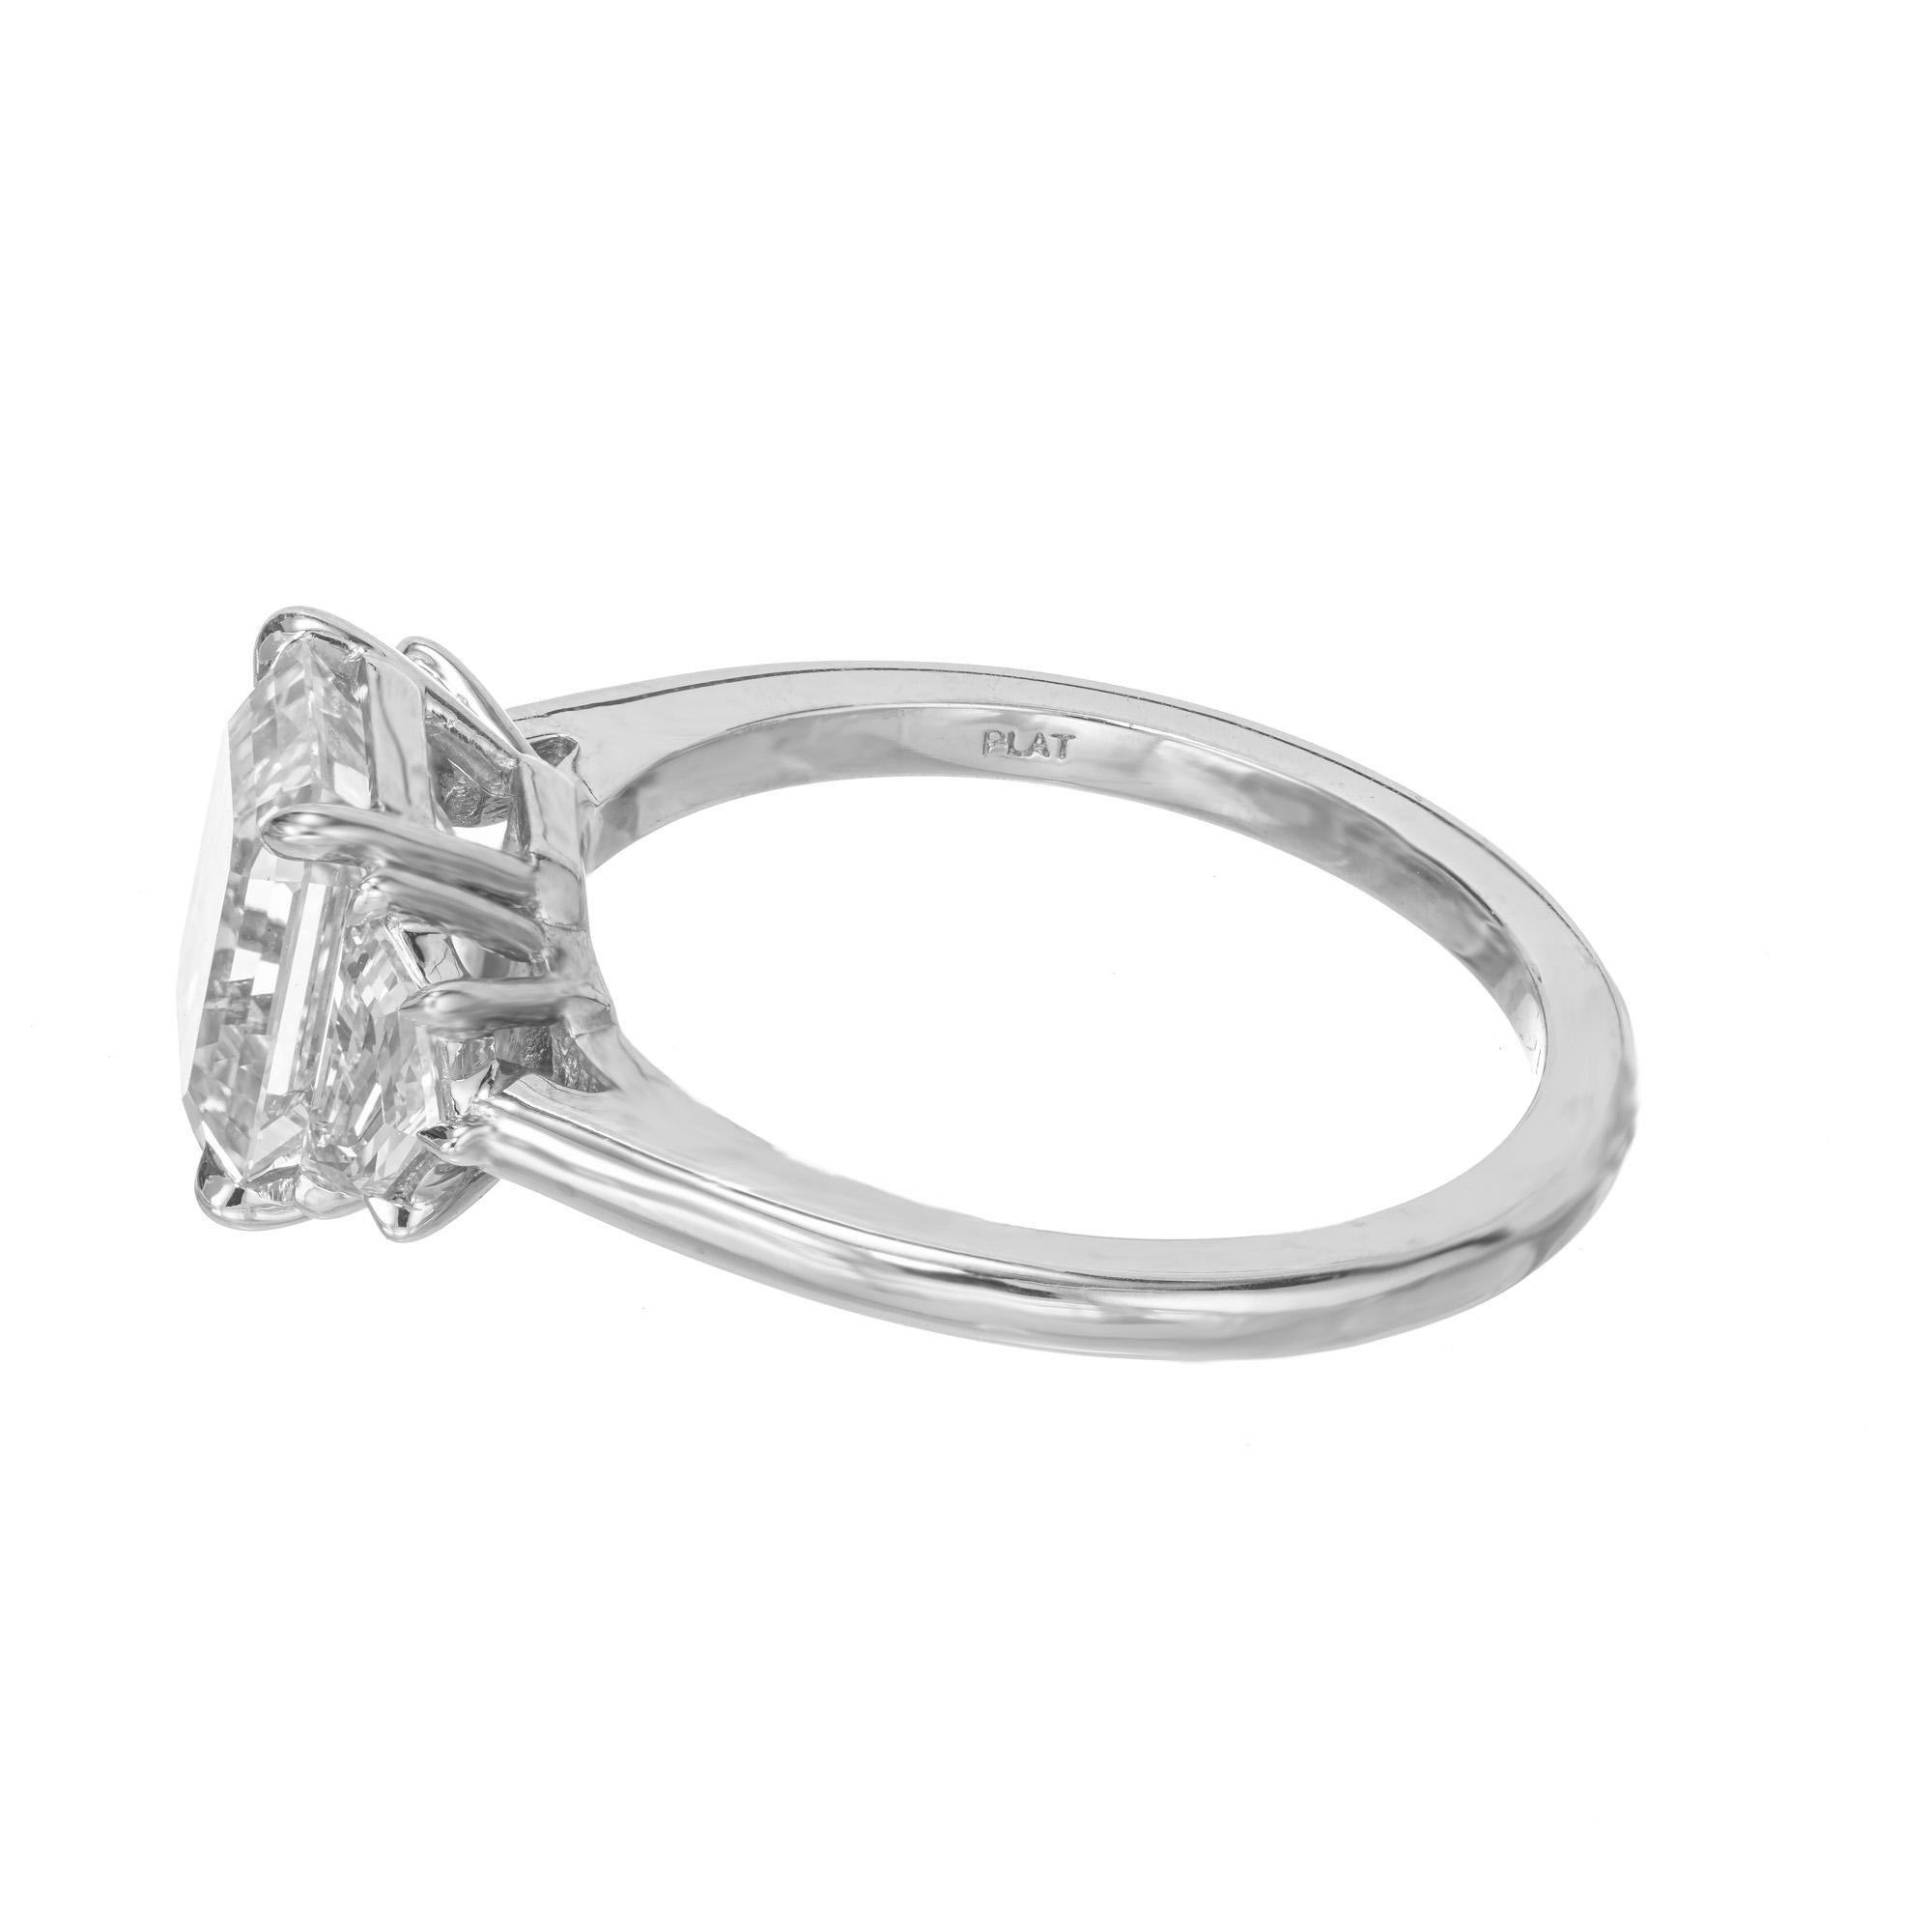 Women's Peter Suchy GIA Certified 2.32 Carat Diamond Platinum Ring For Sale